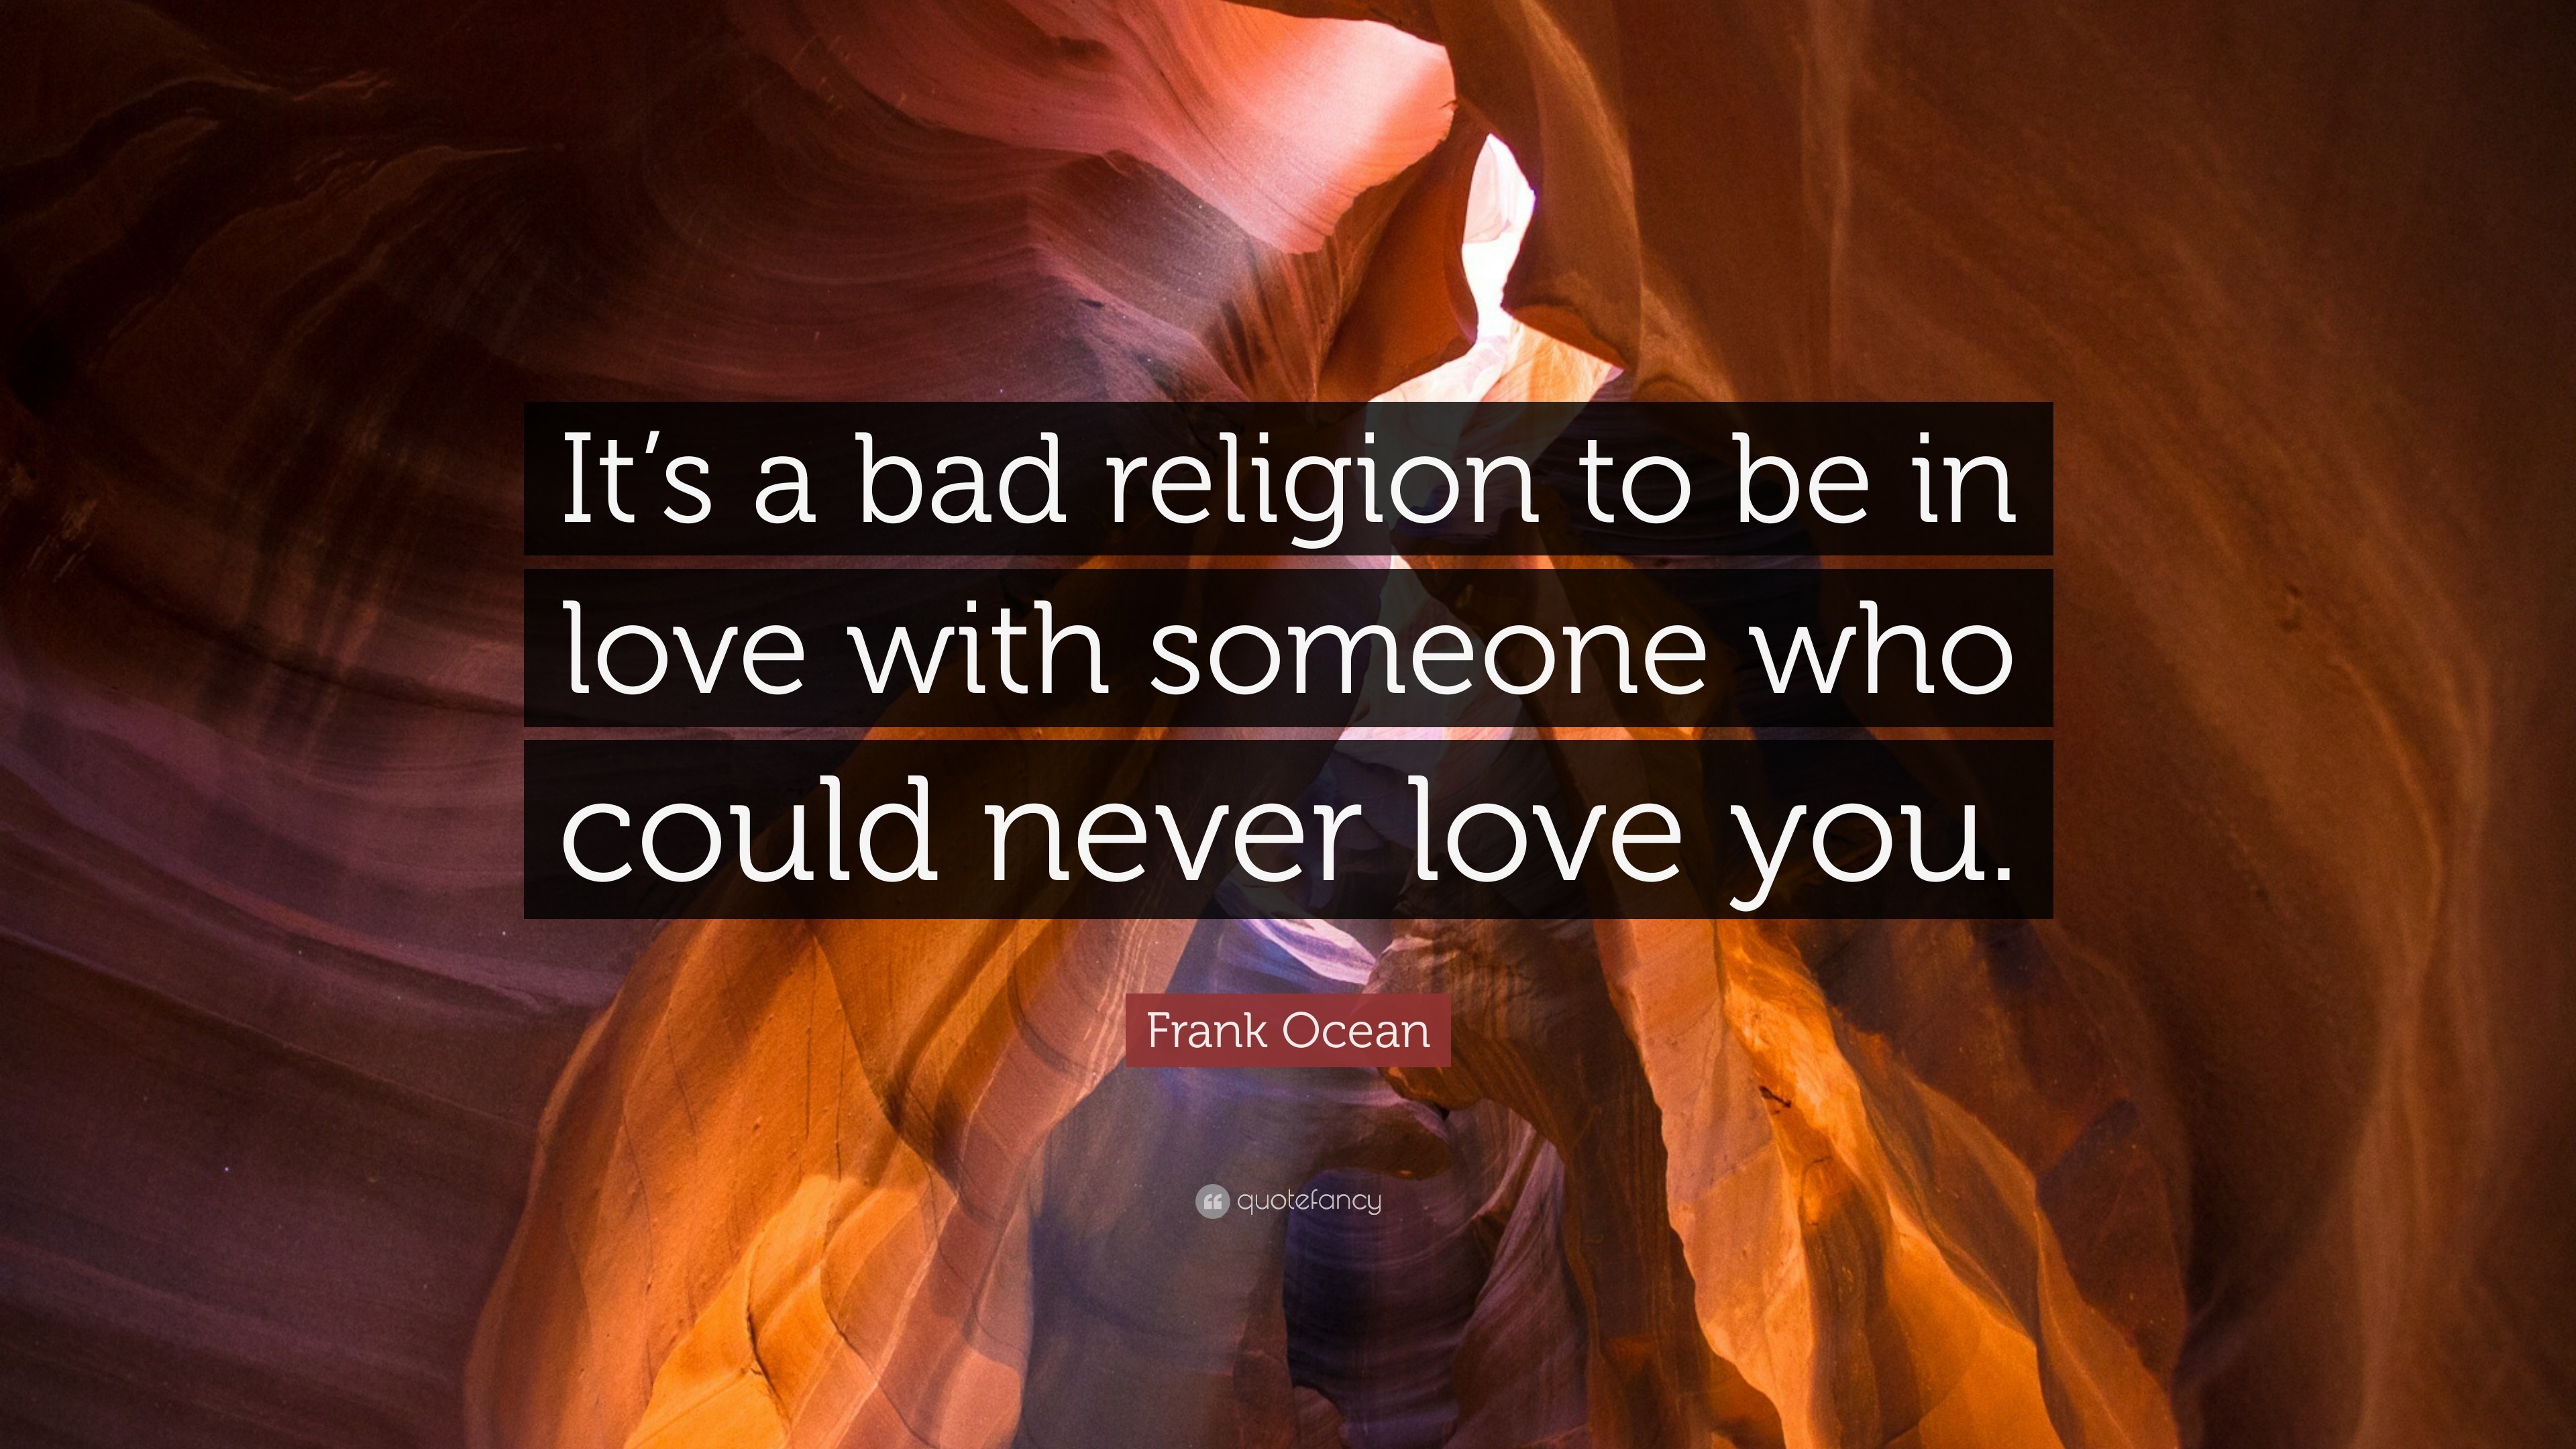 3840x2160 Frank Ocean Quote: “It's a bad religion to be in love with someone who